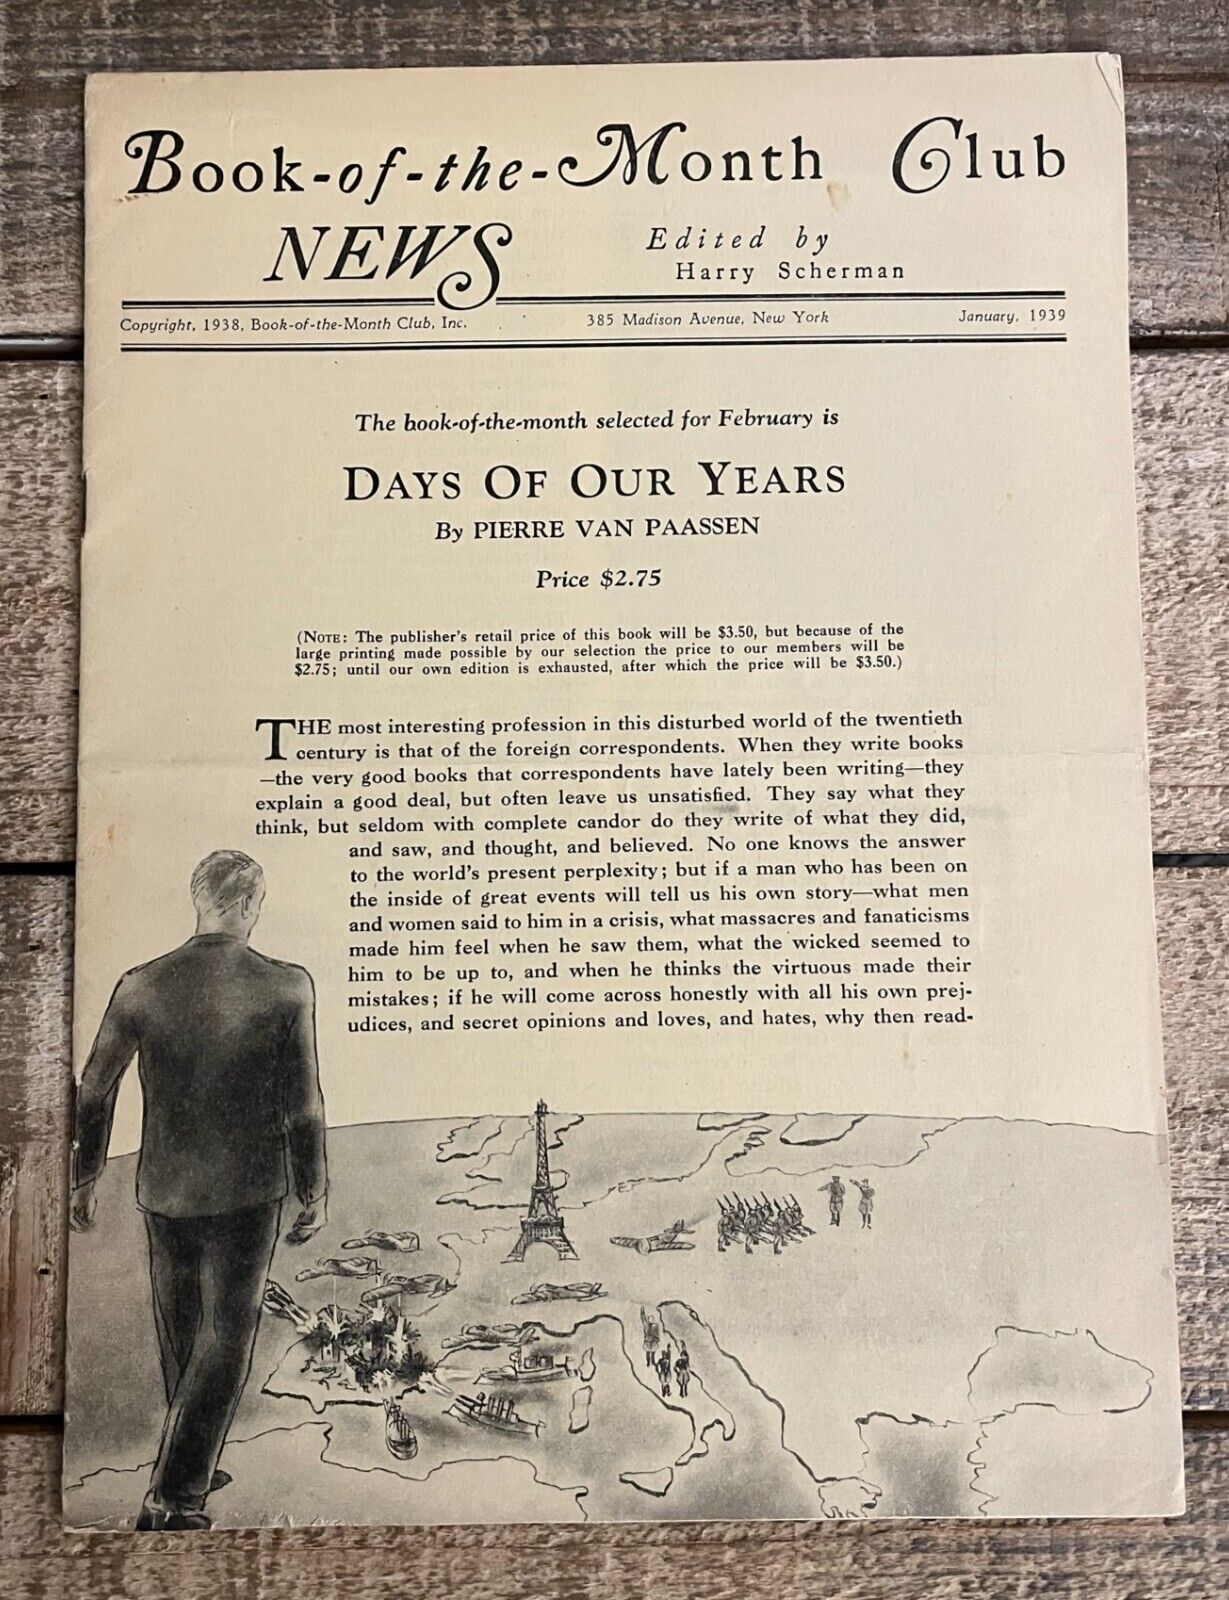 Harry Scherman Book of the Month Club News, January 1939, Collectible Document